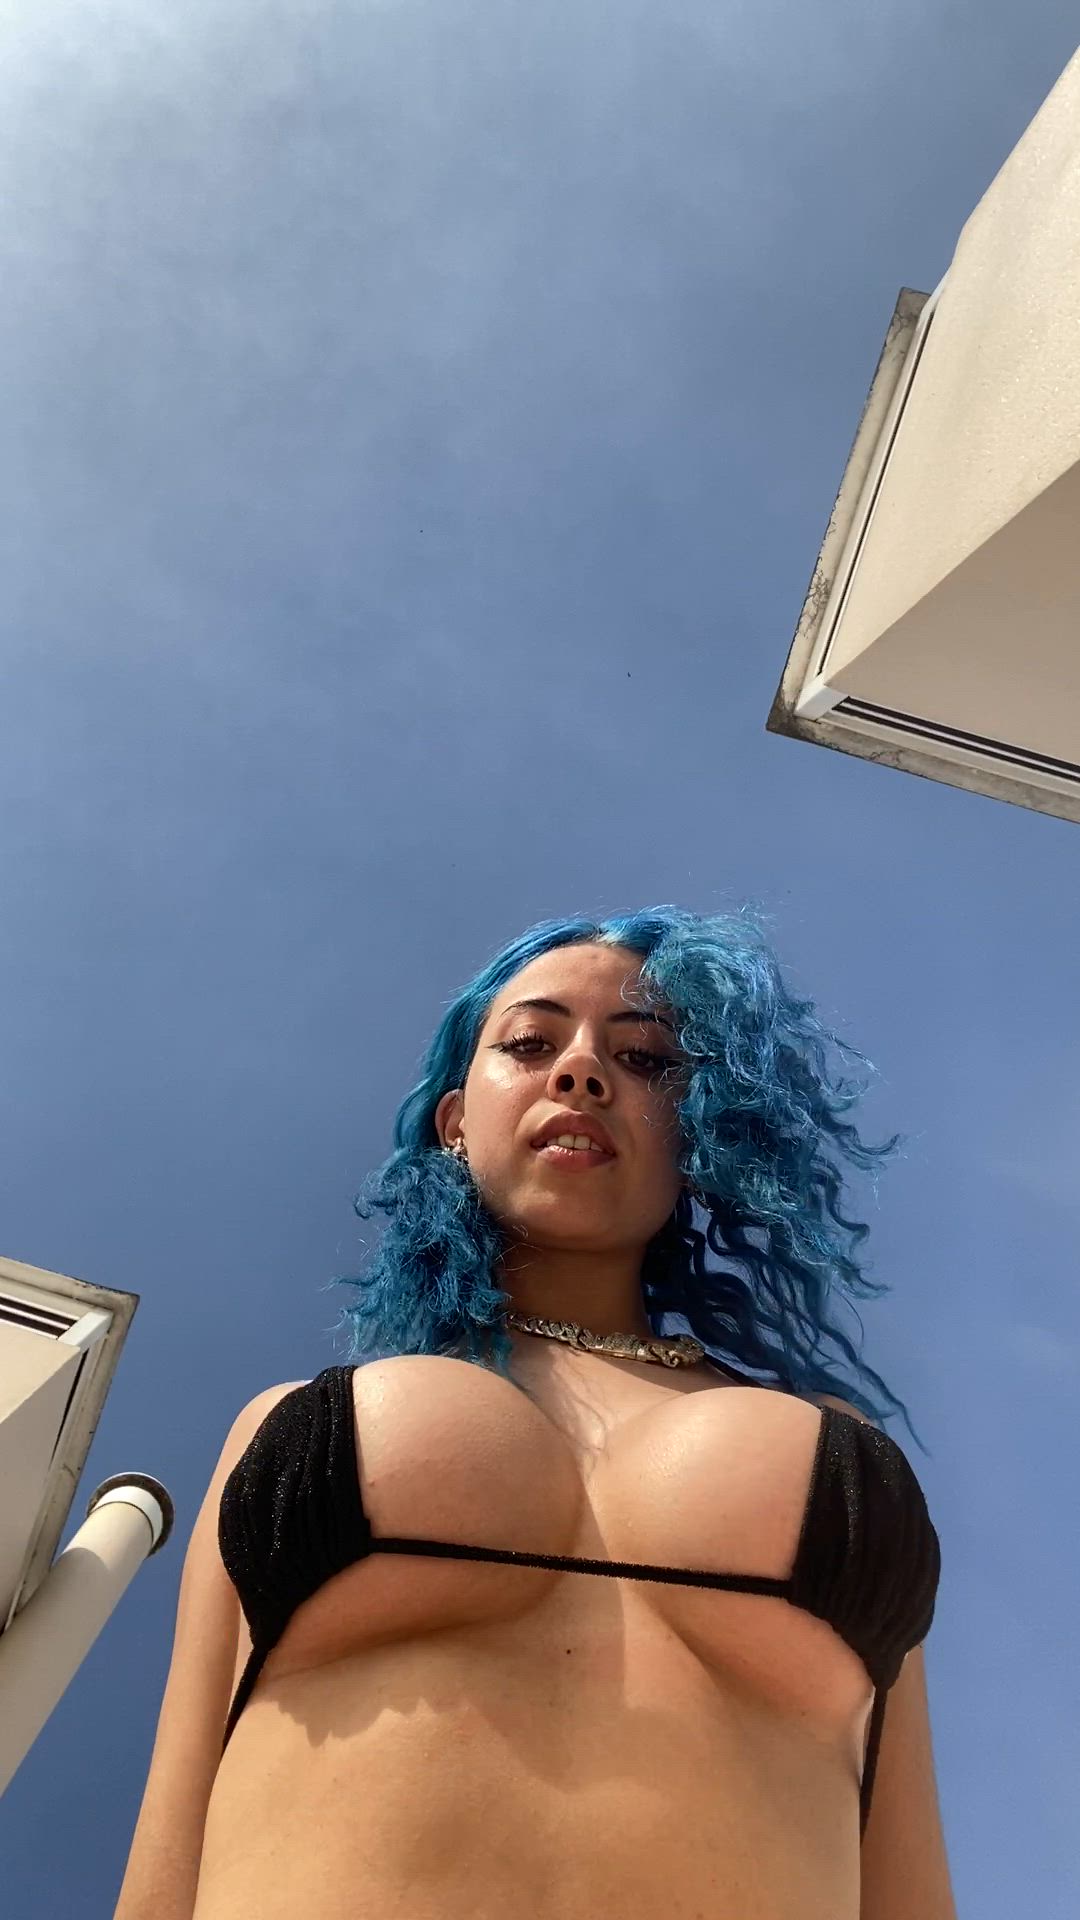 Amateur porn video with onlyfans model trixiexfantasy <strong>@trixiefantasyy</strong>